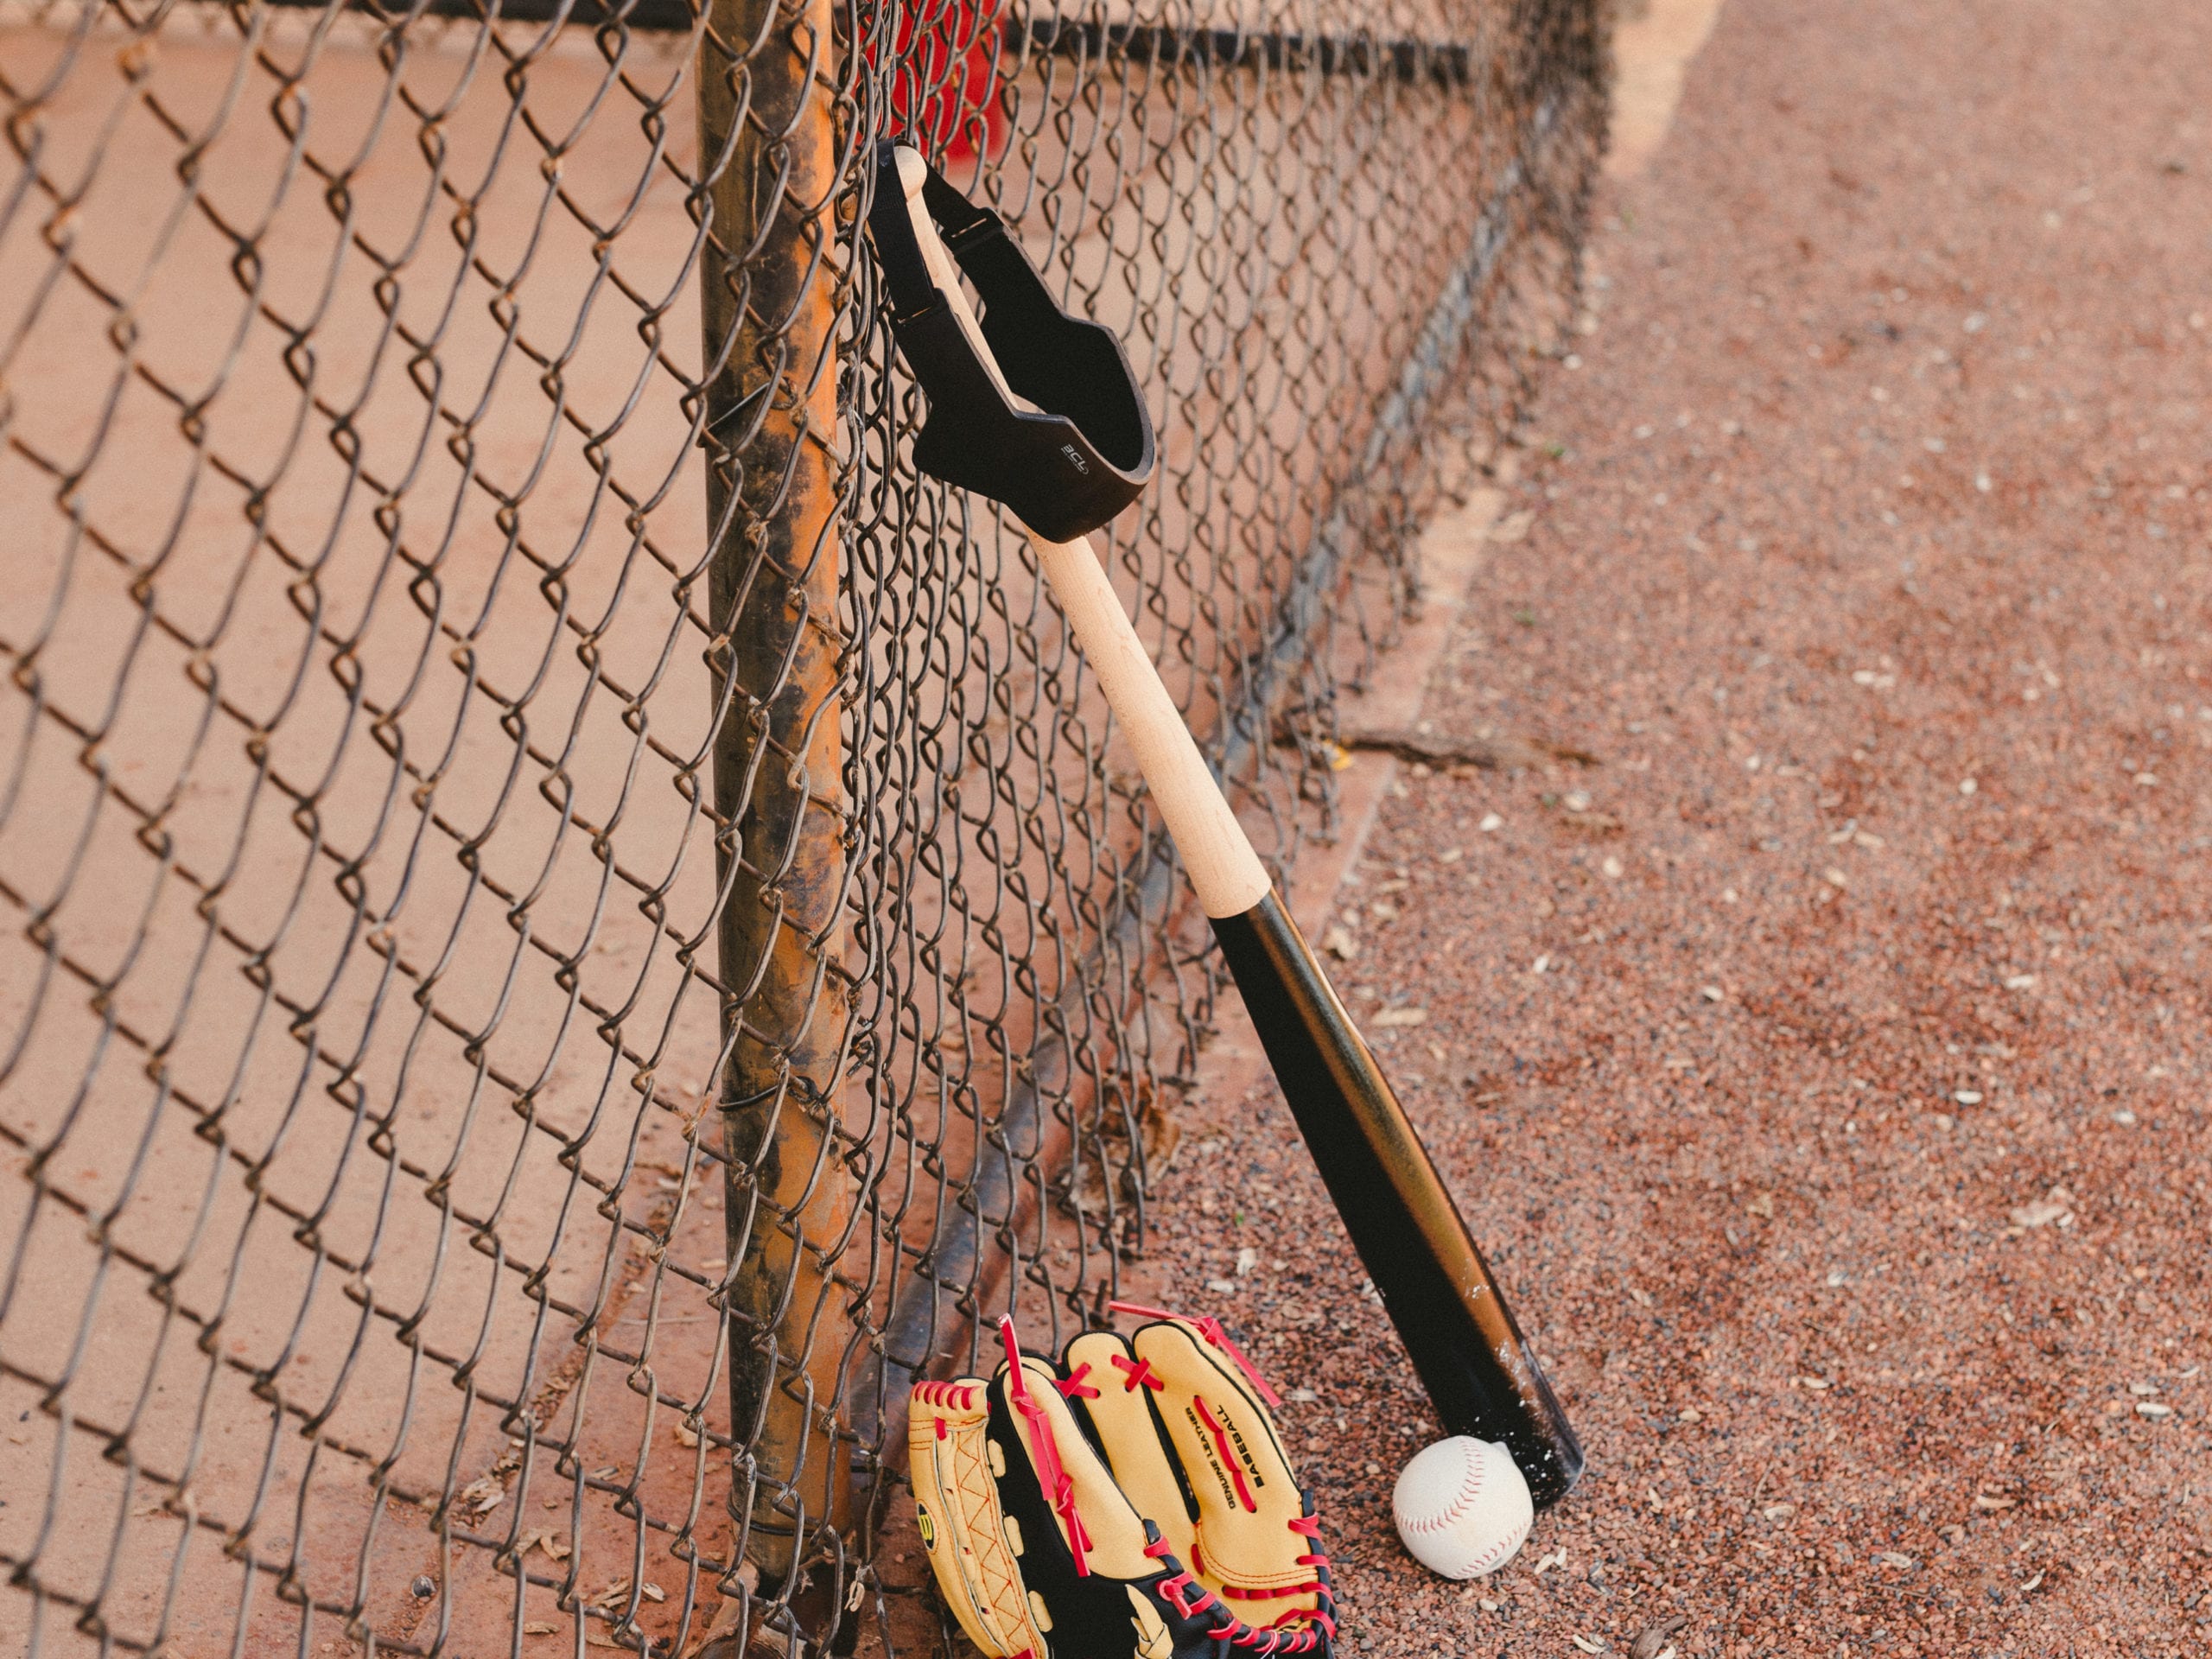 IU C&I Studios Portfolio Ball Cap Liner Closeup of baseball mitt and baseball on the ground and baseball bat leaning against a chain link fence with a BCL hanging on the bat